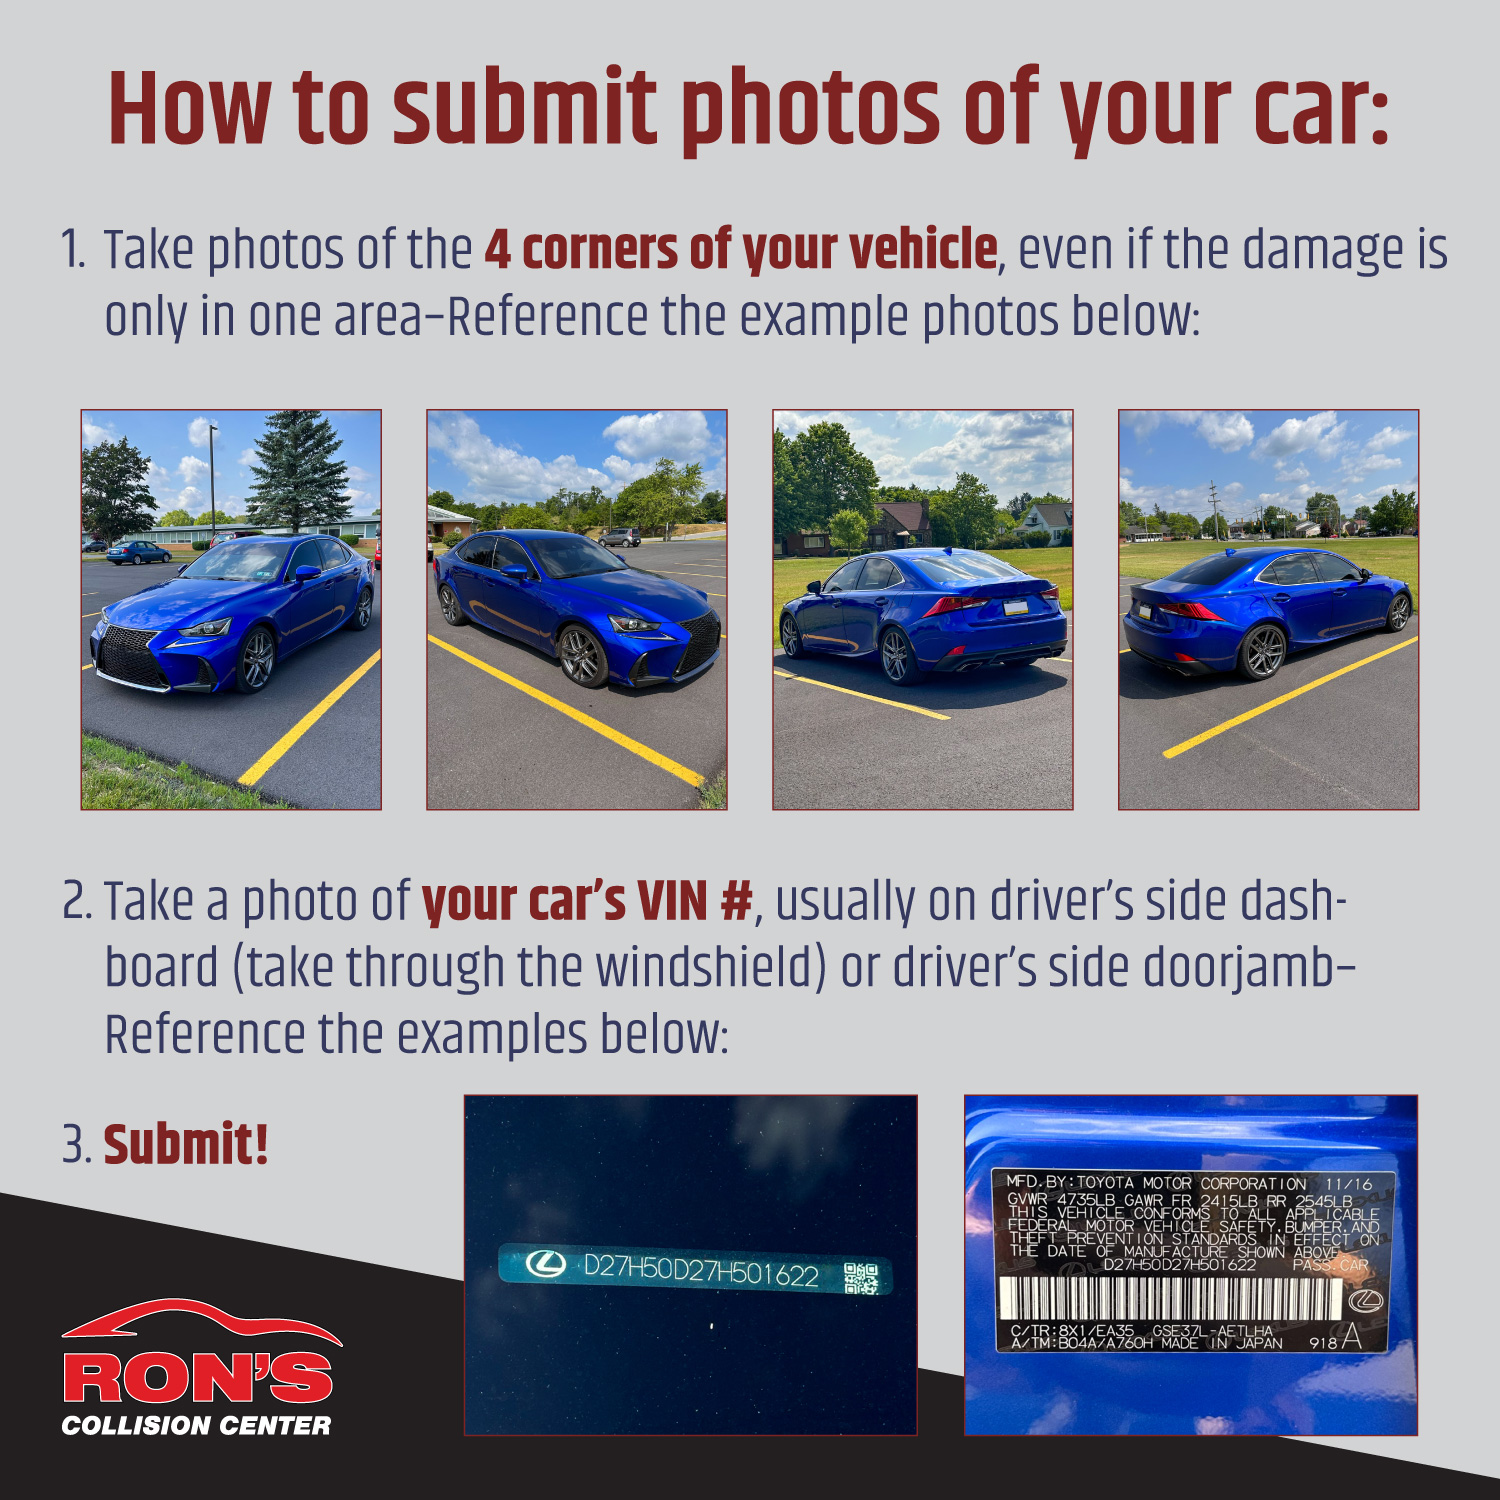 Take photos of all four corners of your vehicle, even if the damage is only on one side. Then, take a photo of your VIN number (on the dashboard or on the drivers side door jamb) and submit these photos to us.